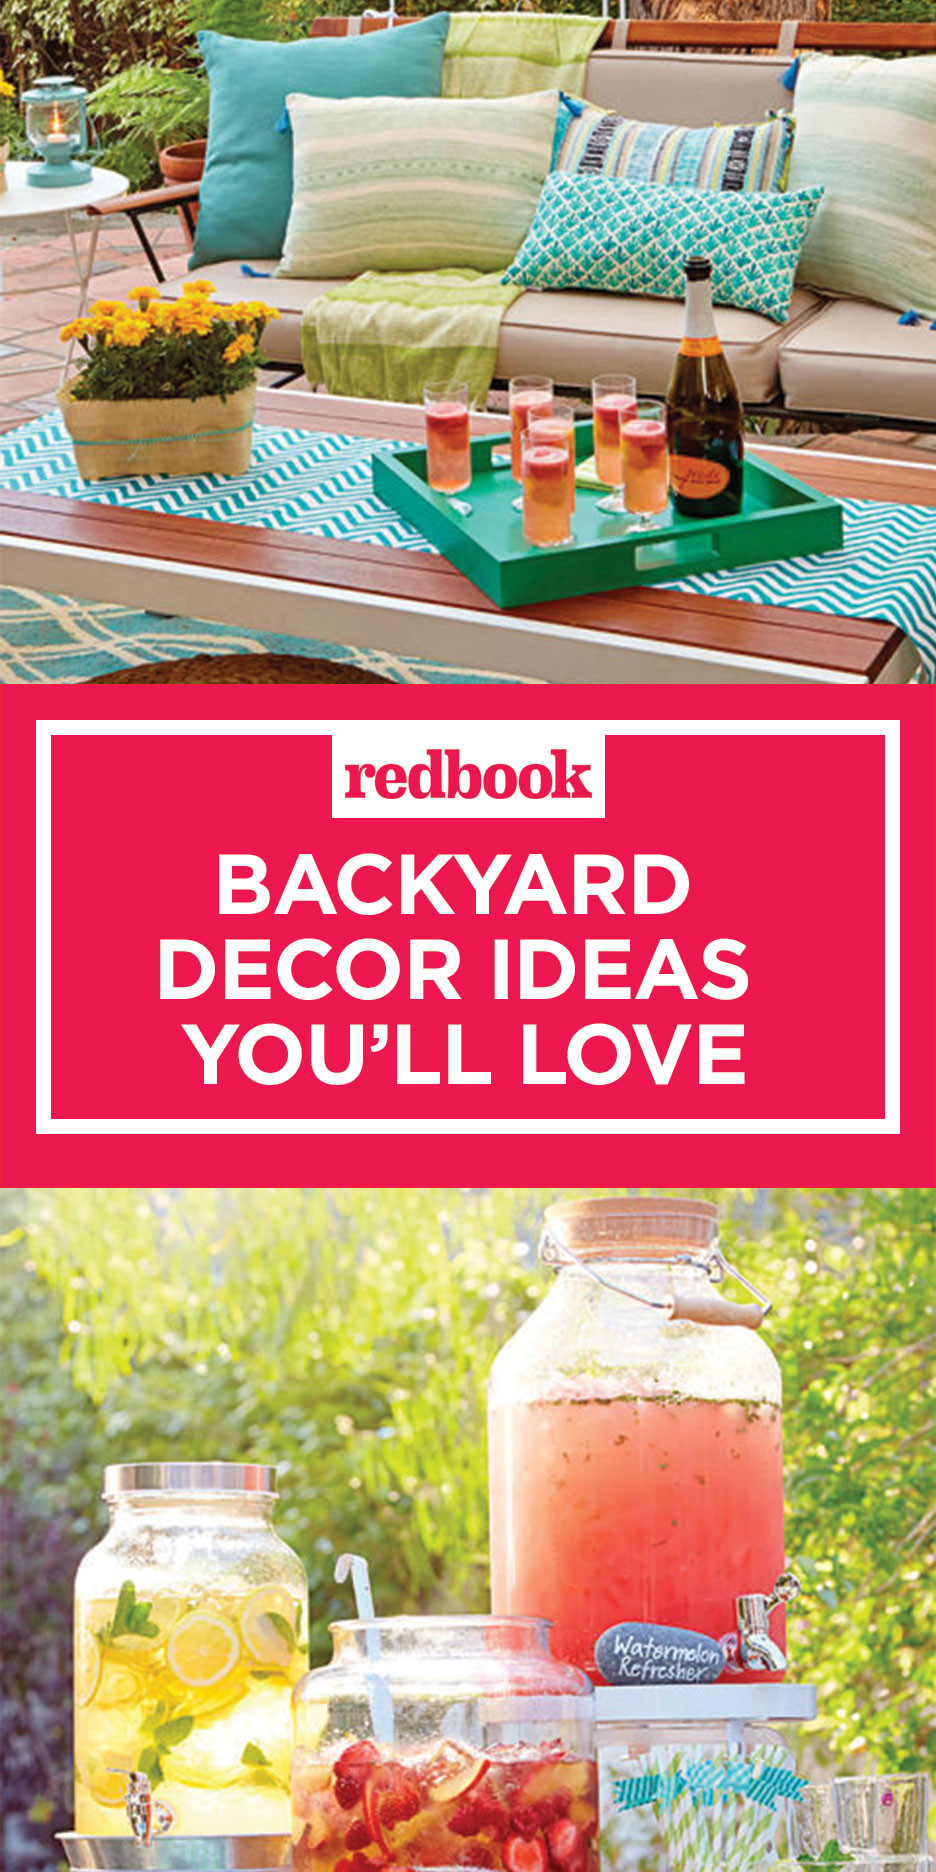 Backyard Birthday Party Decorating Ideas
 14 Best Backyard Party Ideas for Adults Summer